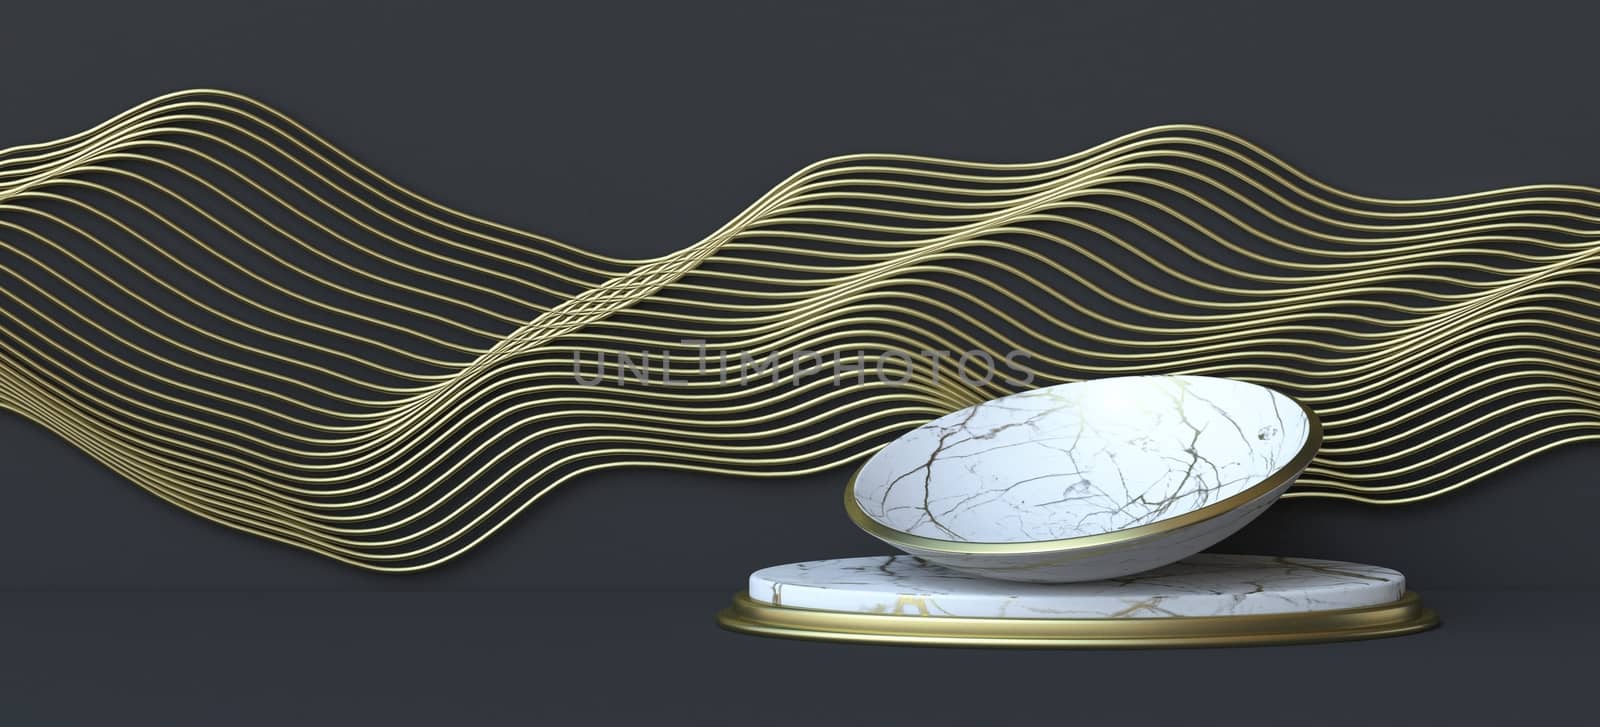 Abstract background with golden lines wave and marble dish 3D by djmilic